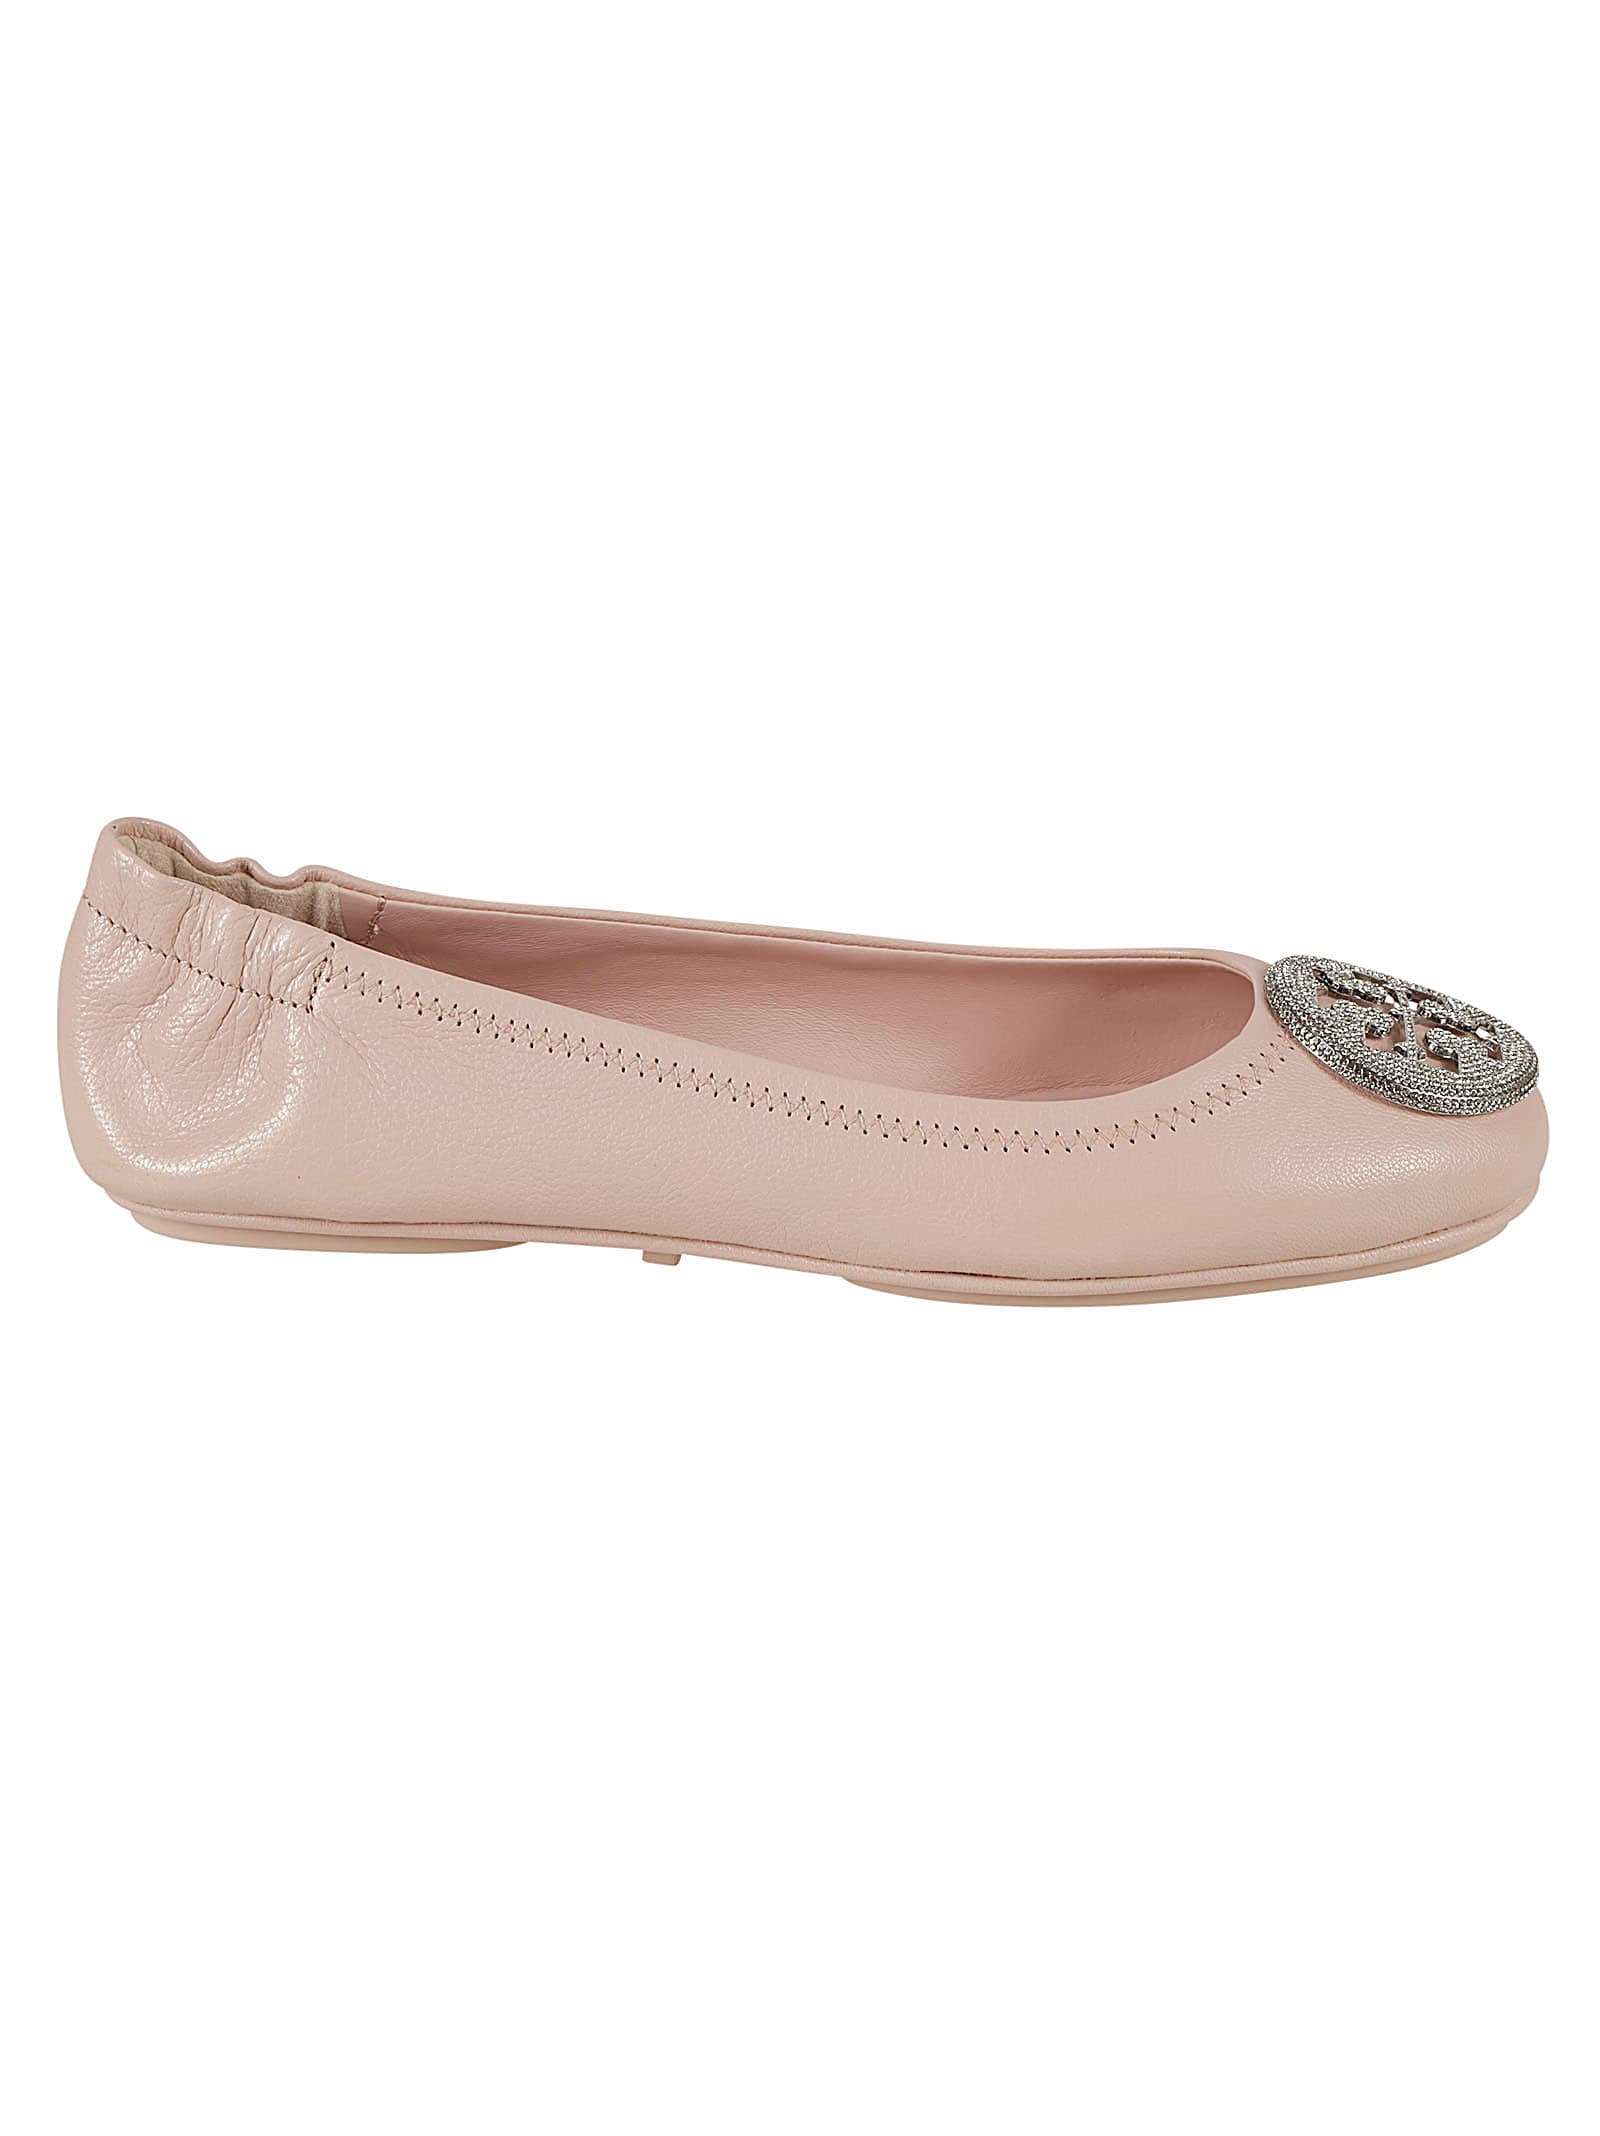 Tory Burch Minnie Travel Ballerinas In Shell Pink/silver